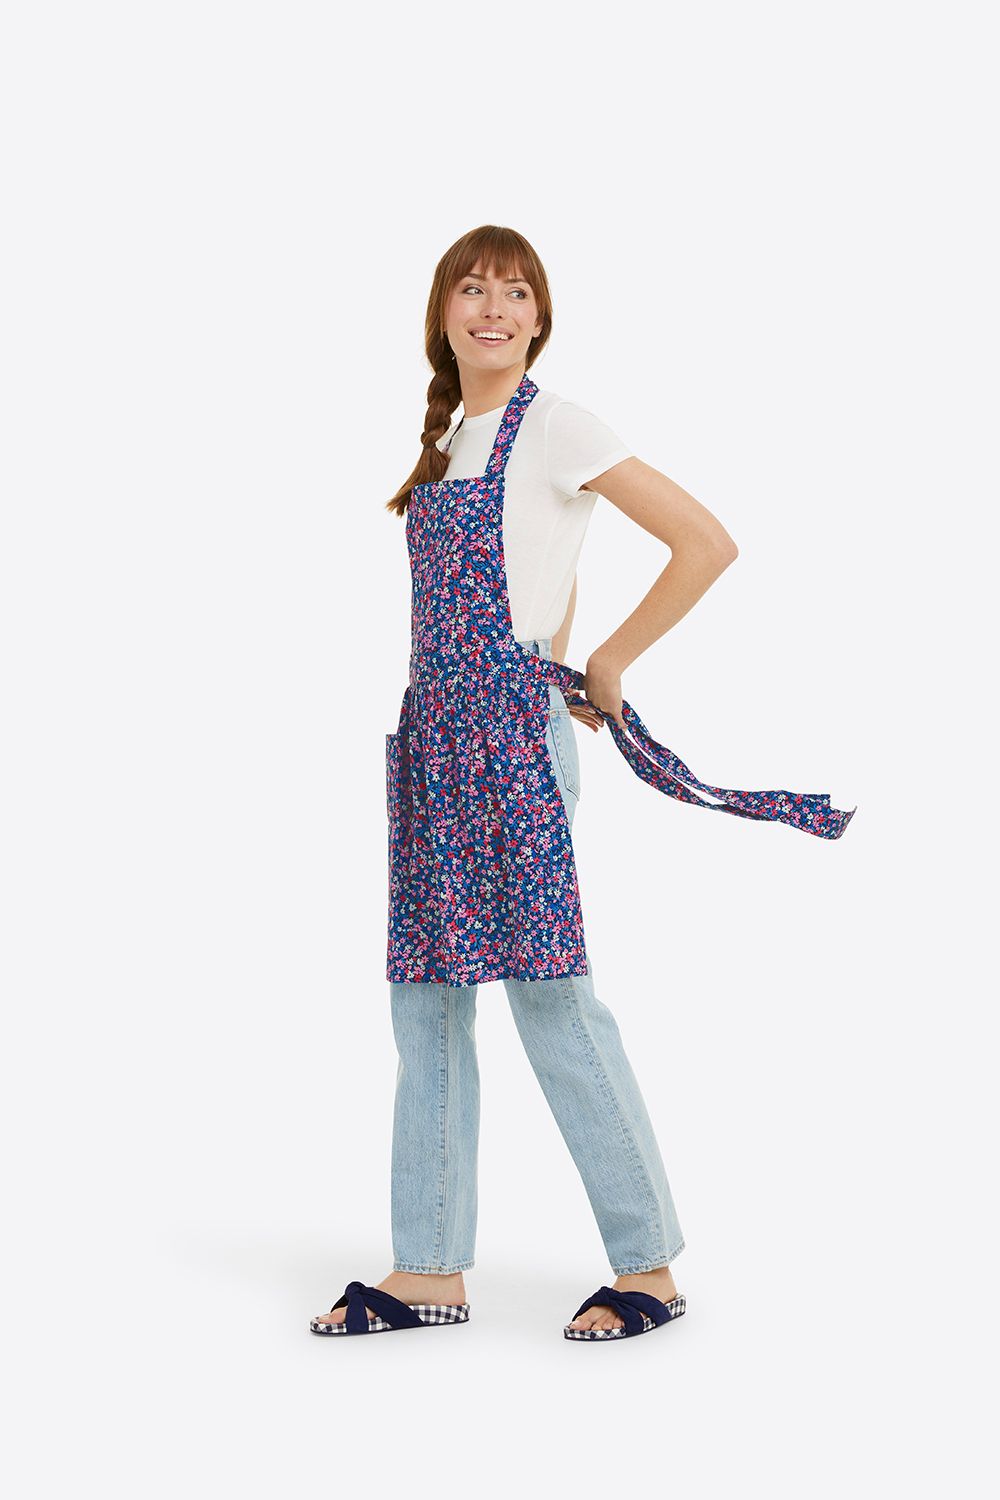 Apron in Spring Ditsy Floral